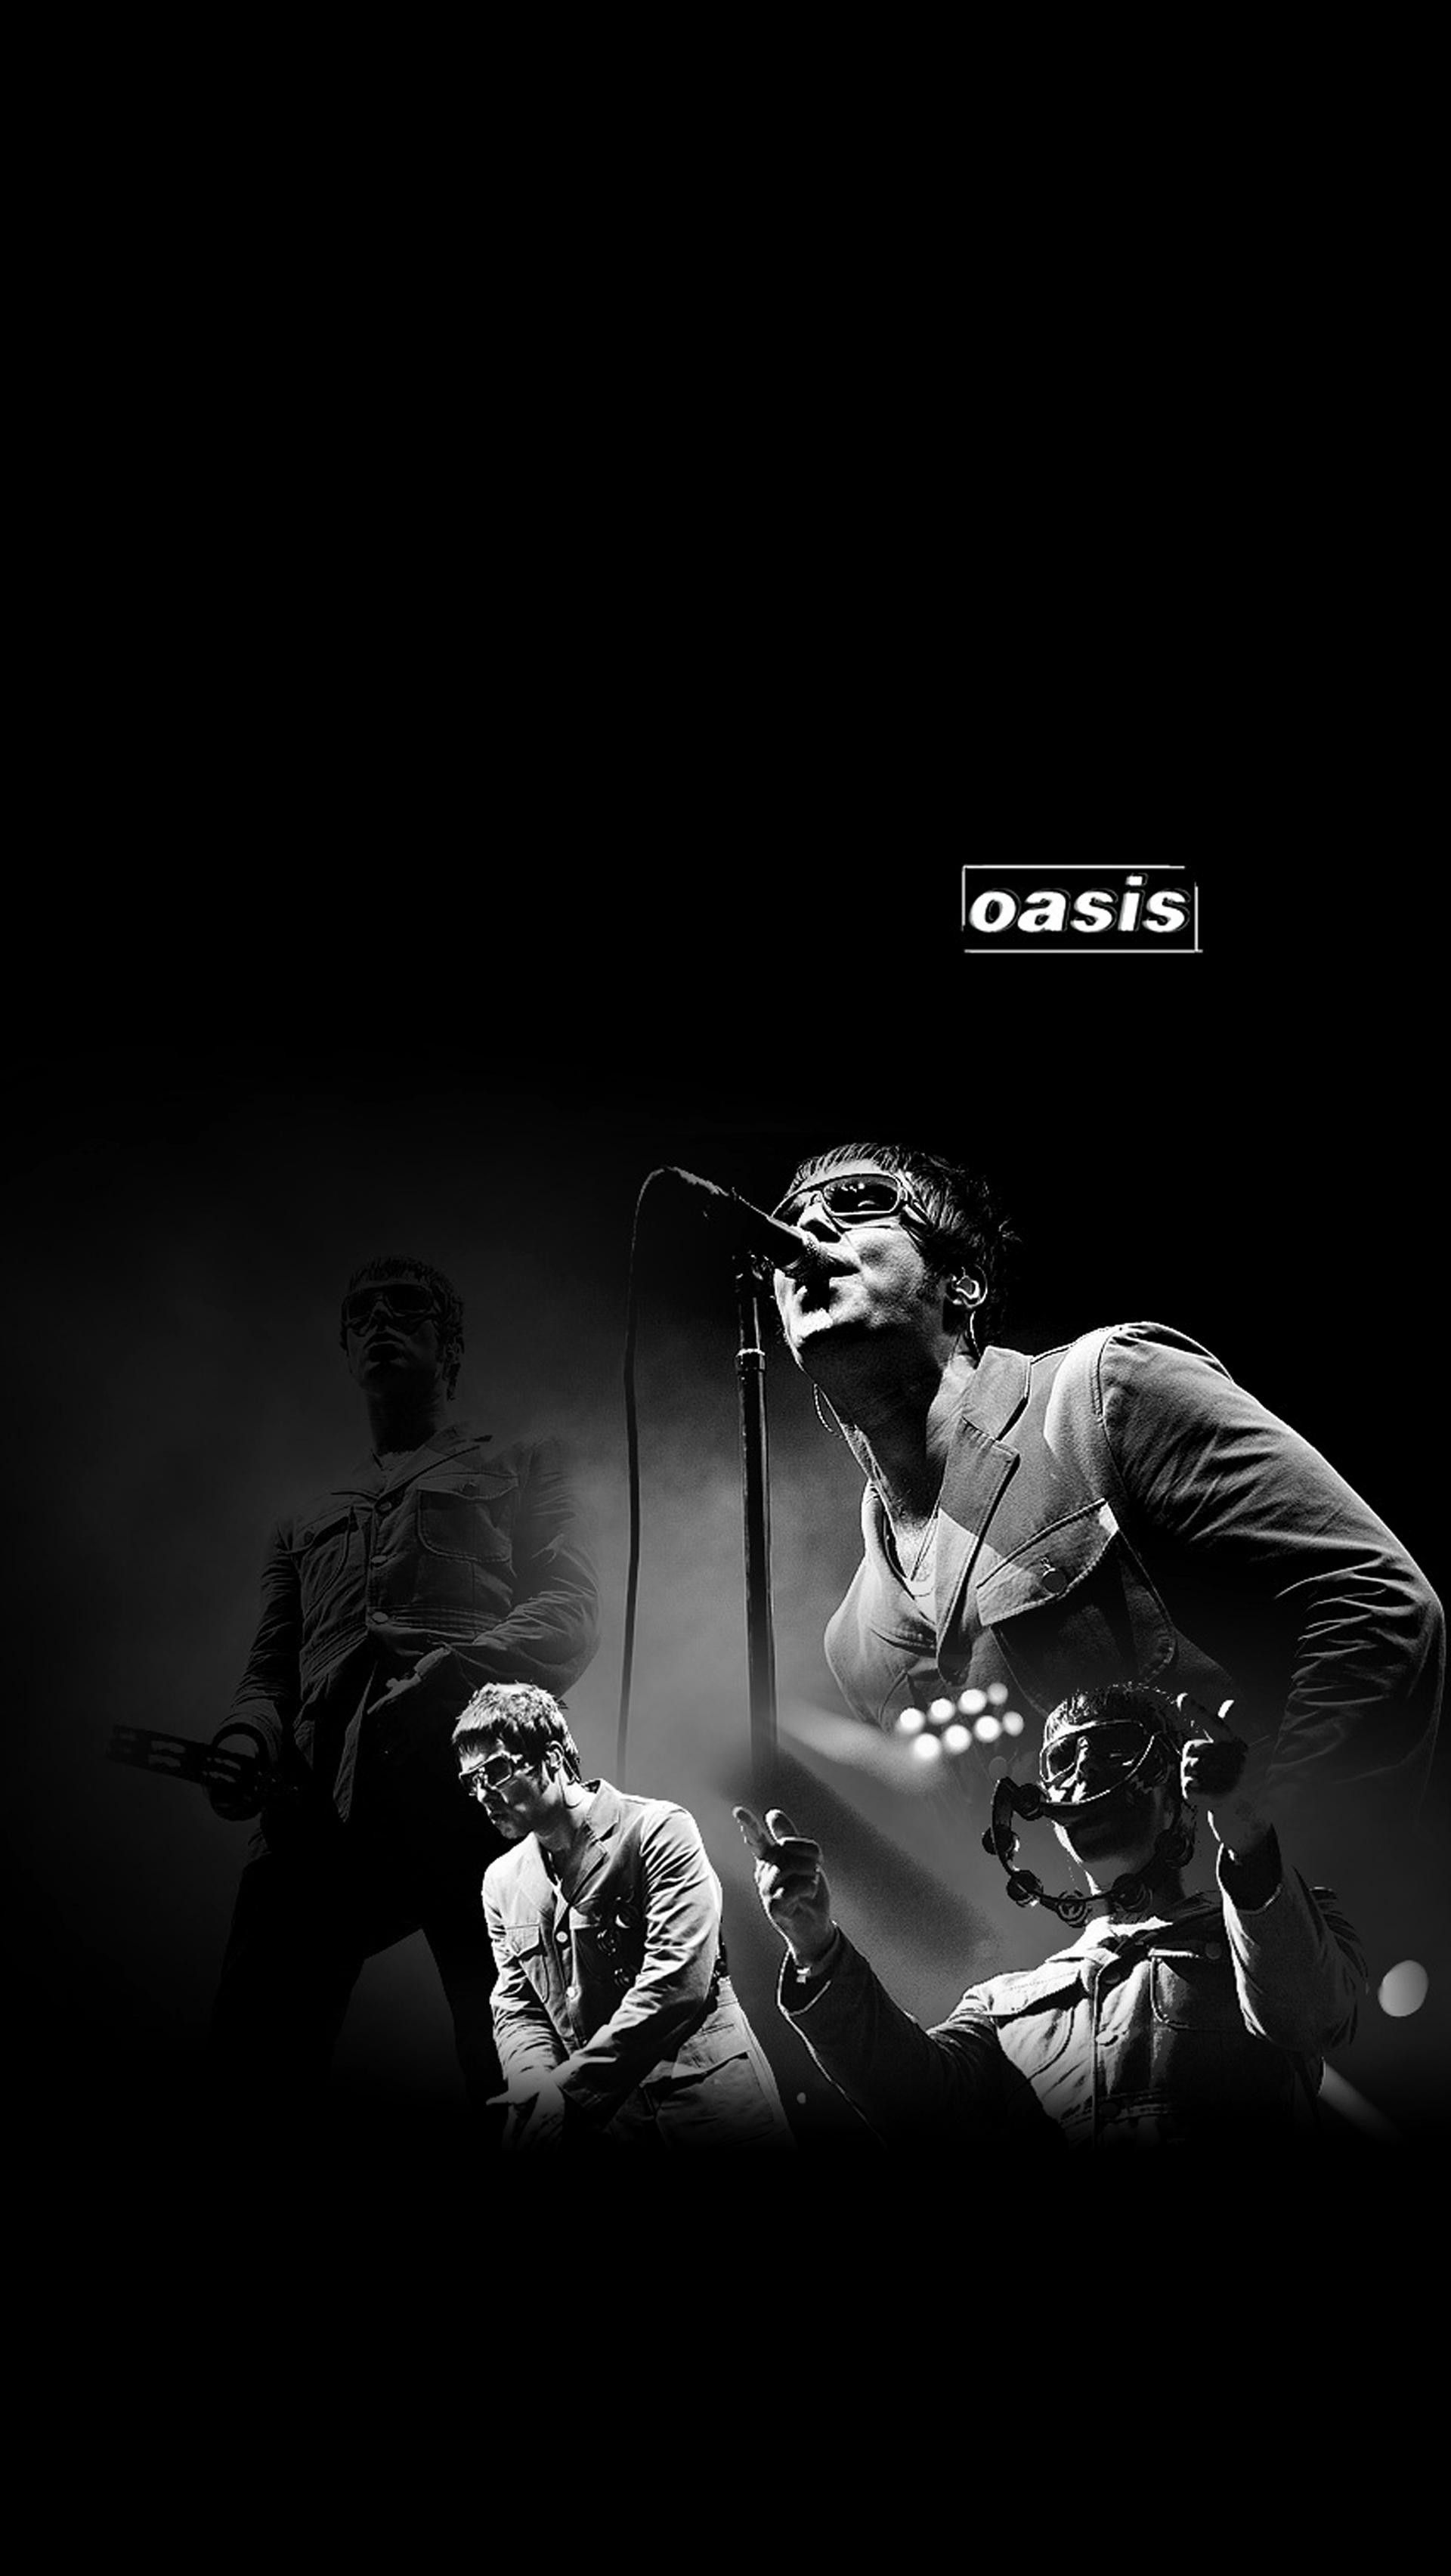 Oasis Iphone Wallpapers